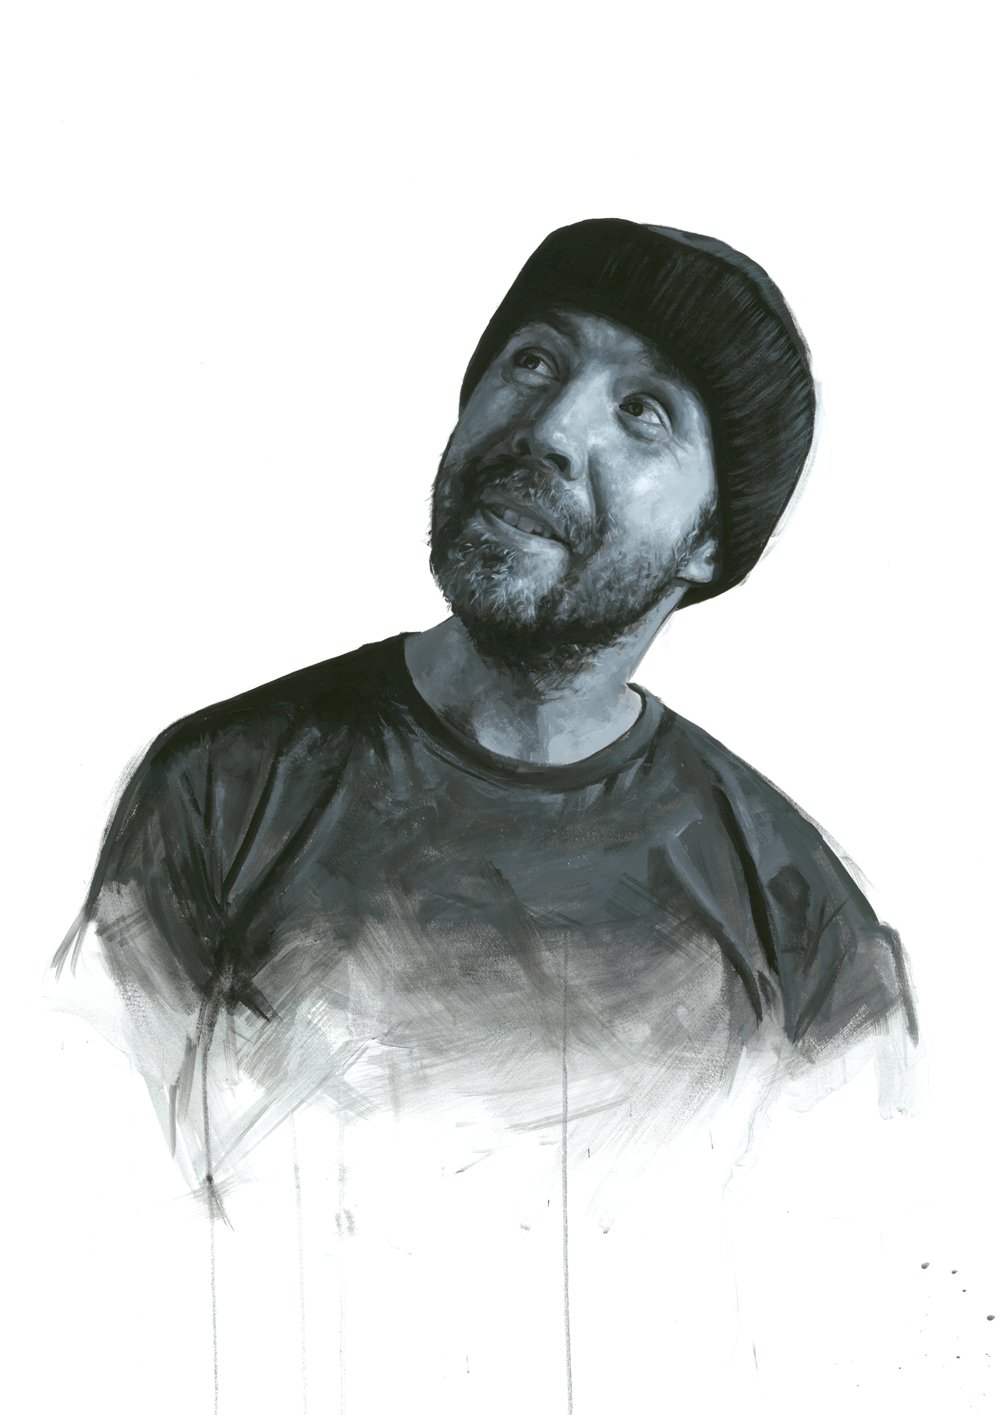 Paddy Considine as Randle McMurphy from One Flew Over The Cuckoo's Nest // Limited Edition print